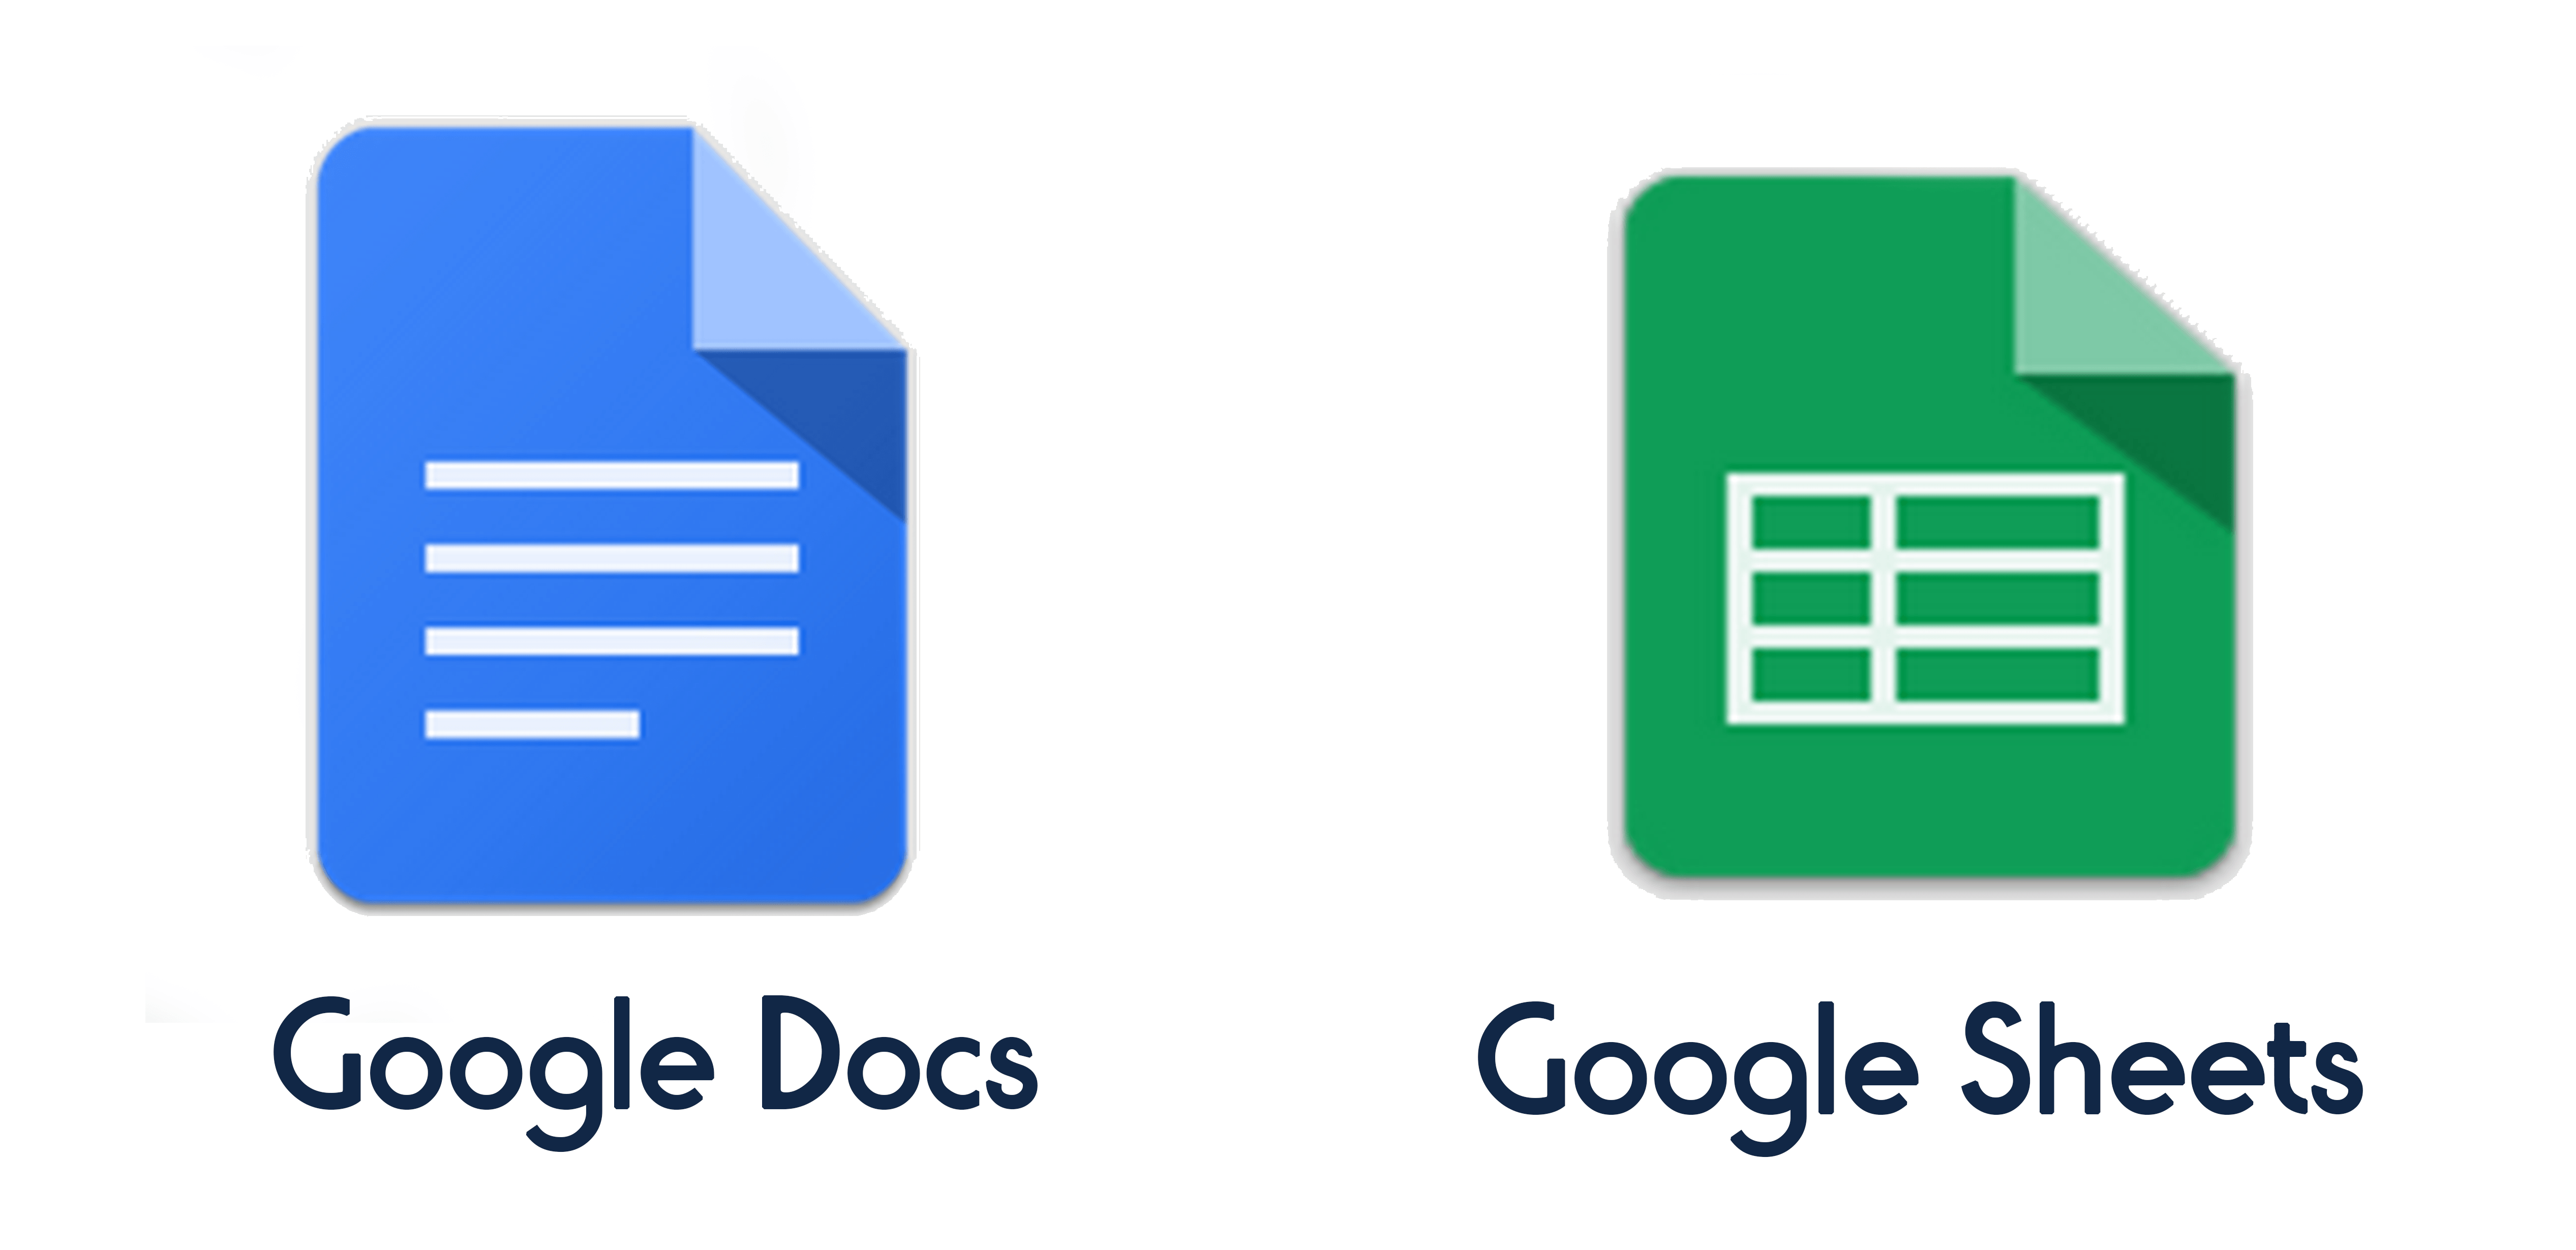 how to resize an image on google docs app